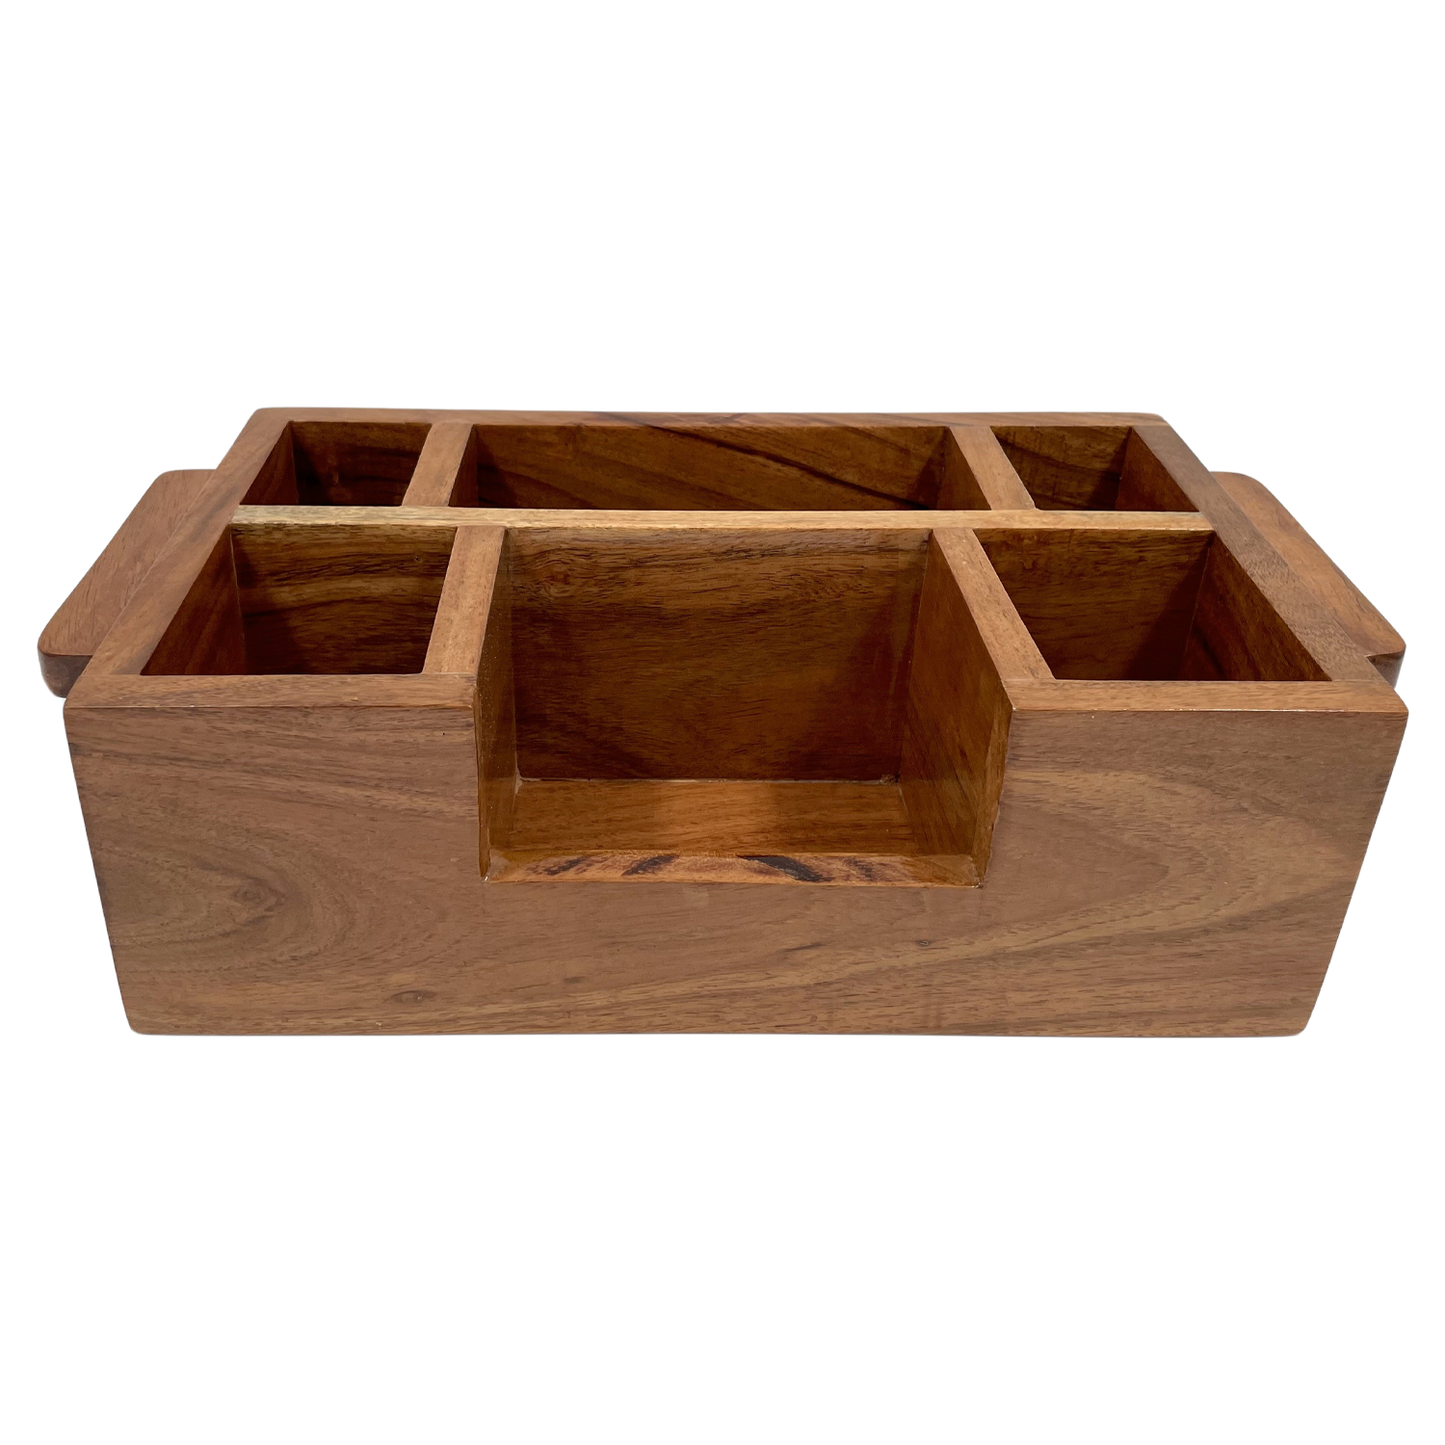 The Weaver's Nest Wooden Cutlery Holder with Salt & Pepper for Kitchen Dining